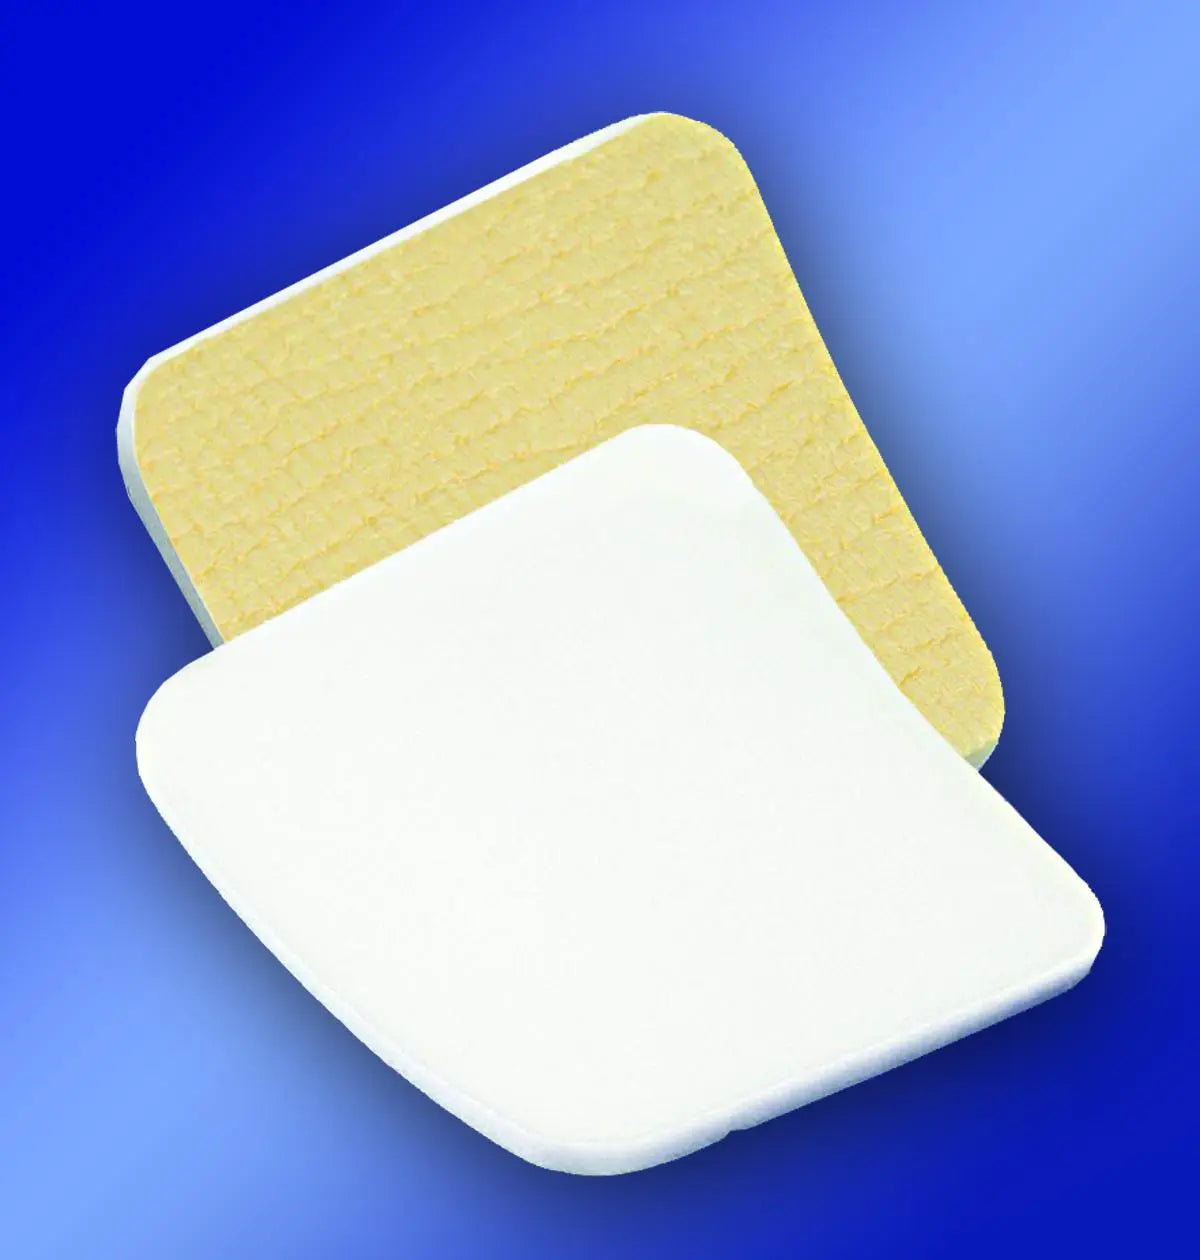 KND 55588BAMDX BX/10 KENDALL AMD ANTIMICROBIAL FOAM BORDER DRESSING, 7.5IN X 7.5IN (6IN X 6IN PAD)